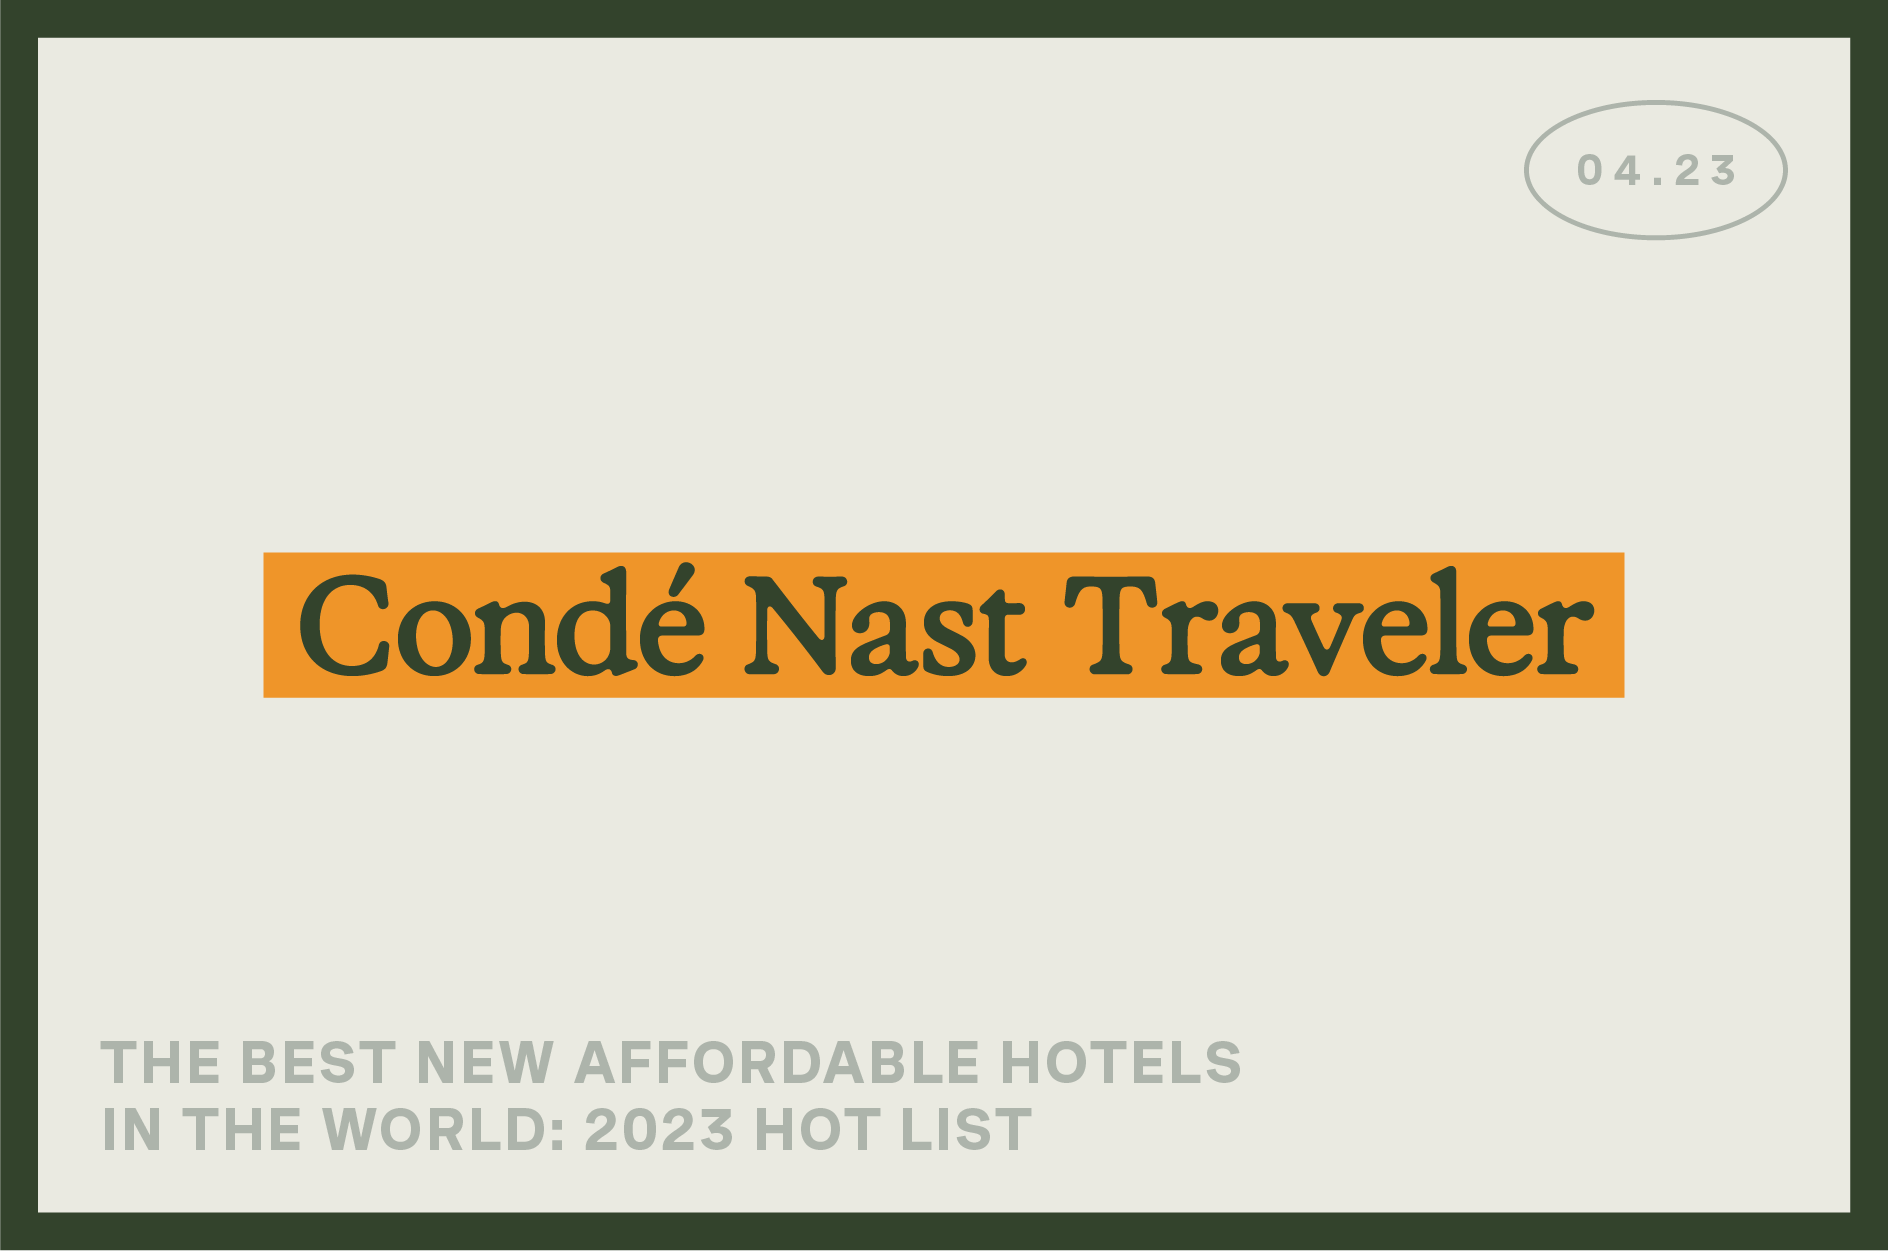 Condé Nast Traveler - The Best new affordable hotels in the world: 2023 Hot list